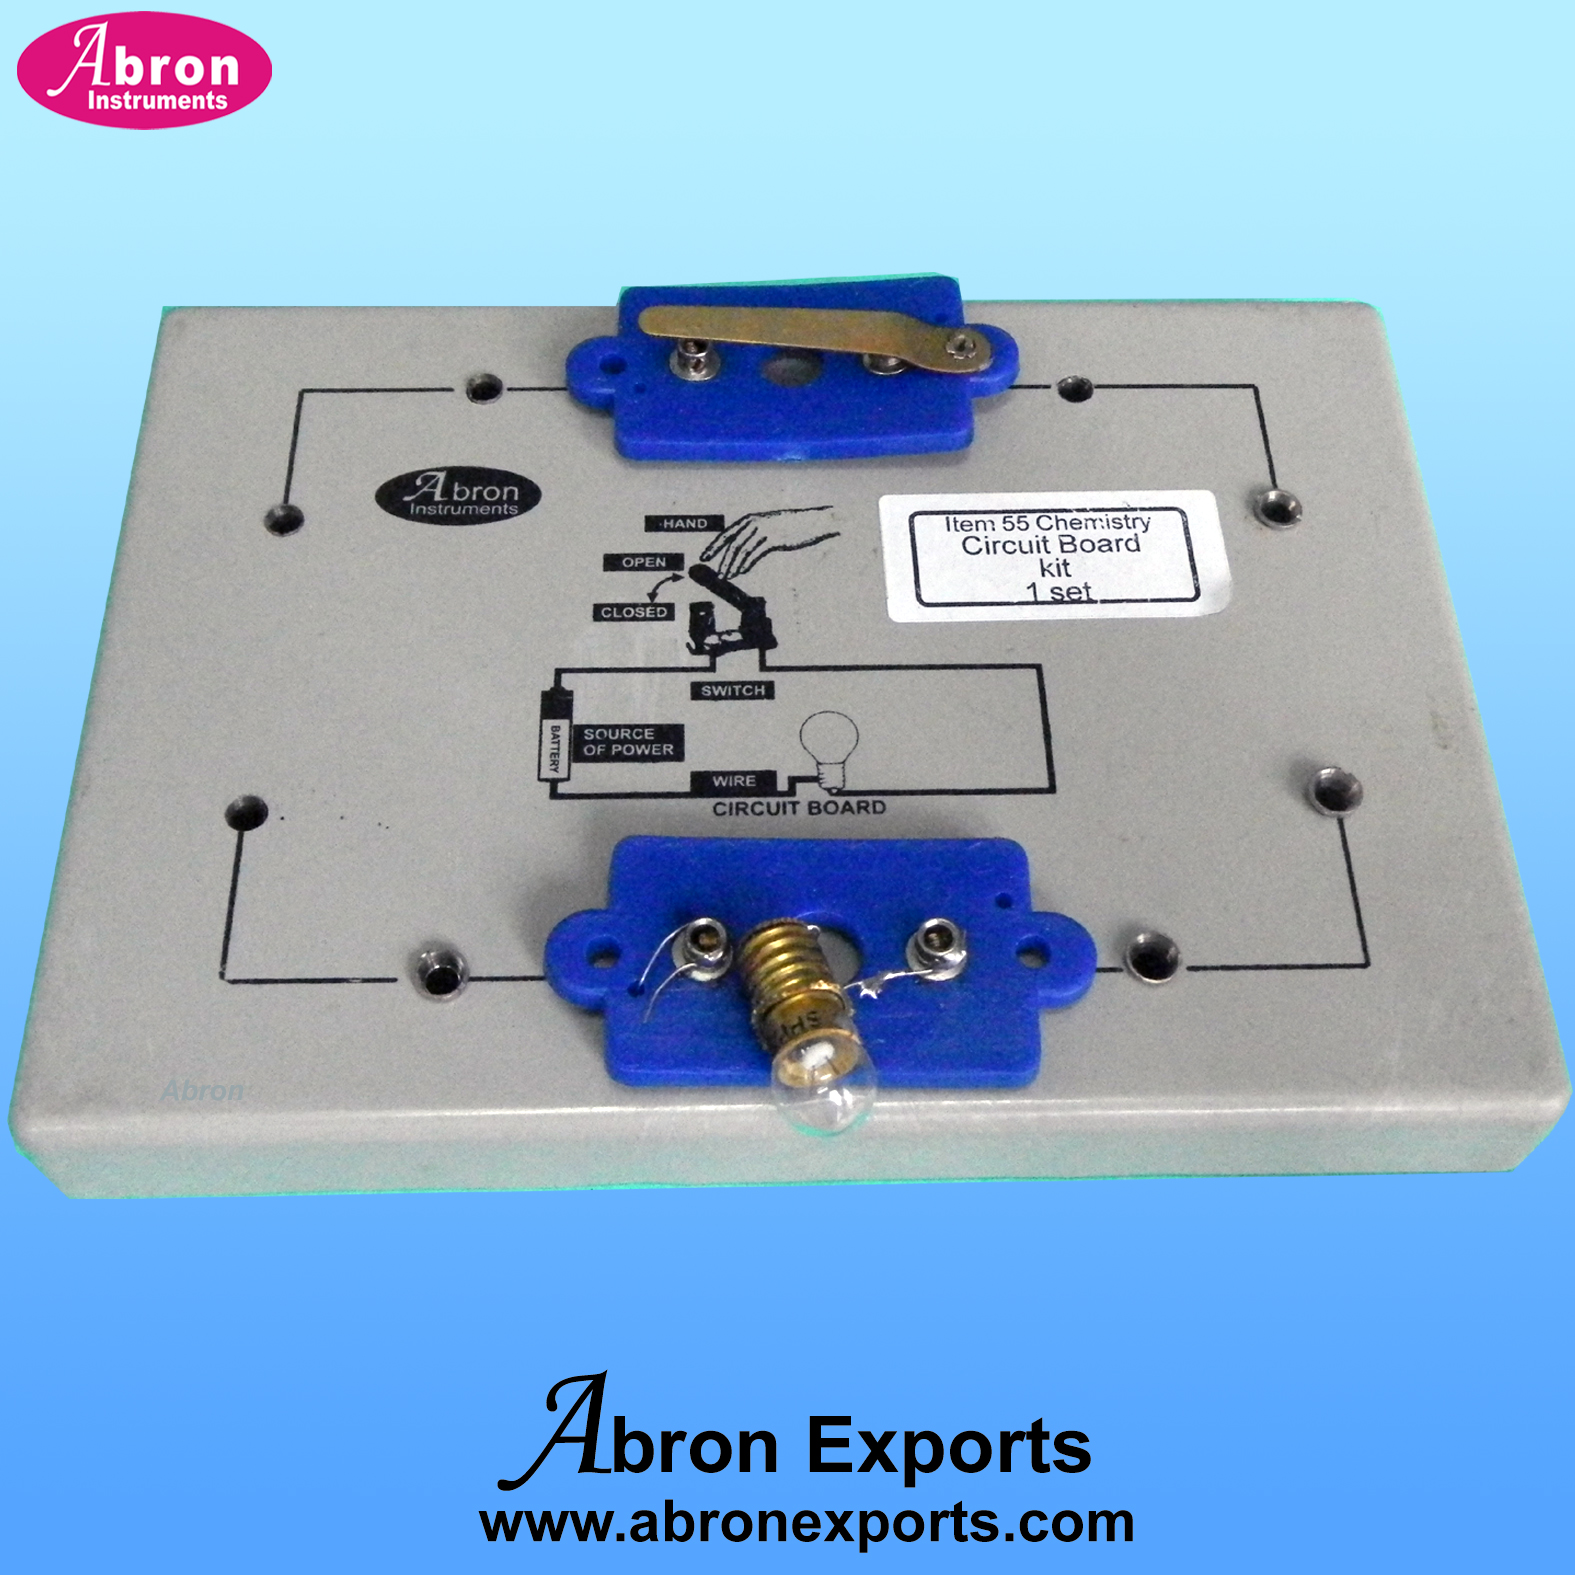 Electronic kit base training board circuit bulb holder wire abron AE-1258Y